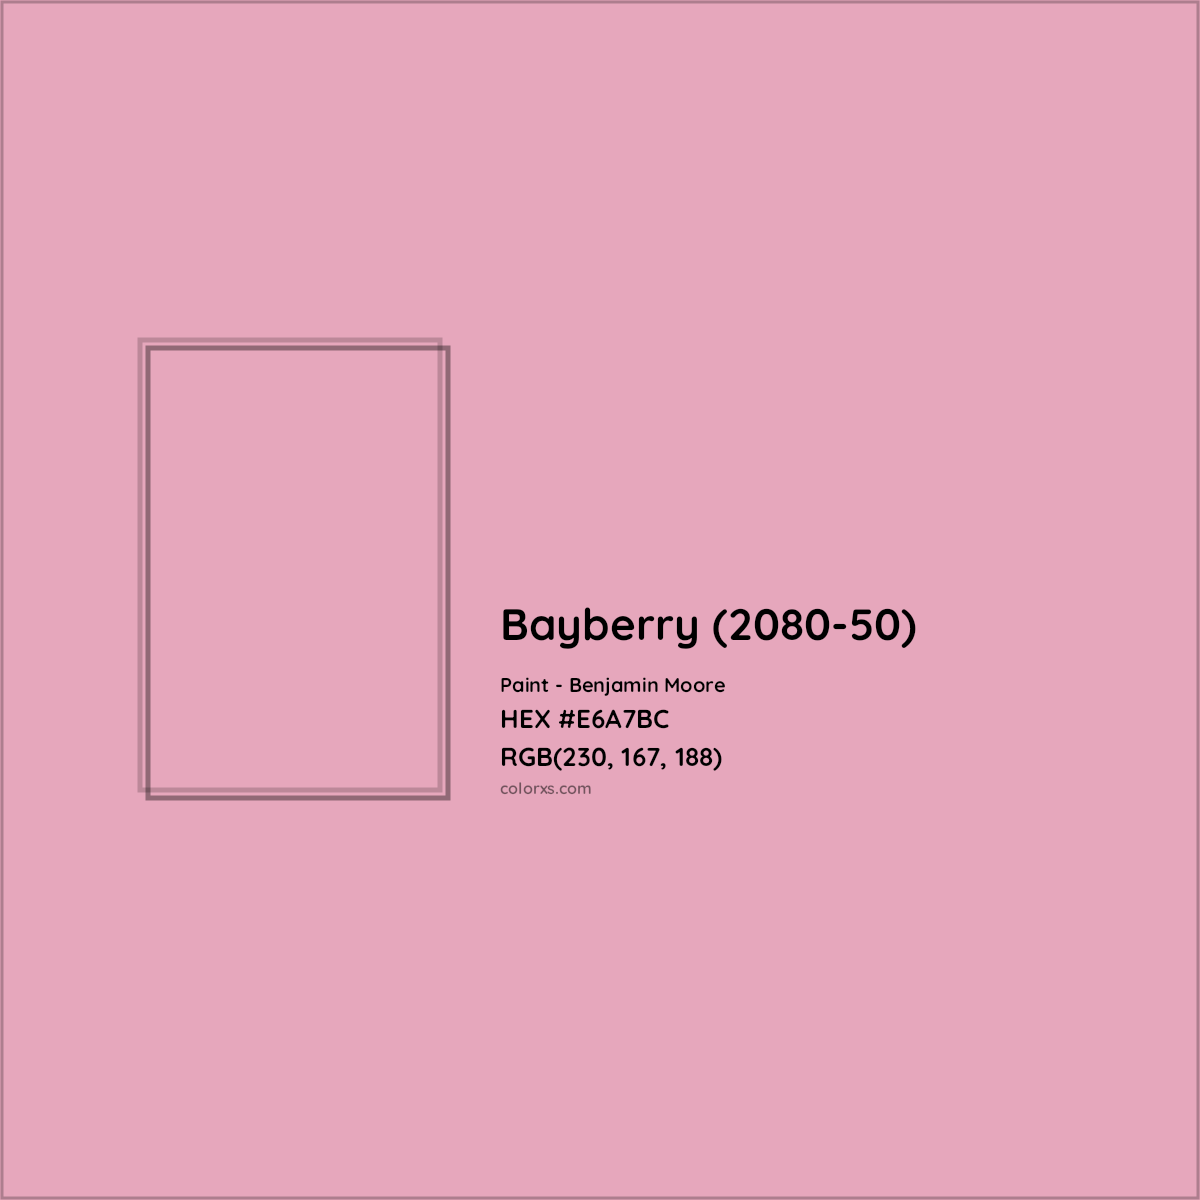 HEX #E6A7BC Bayberry (2080-50) Paint Benjamin Moore - Color Code